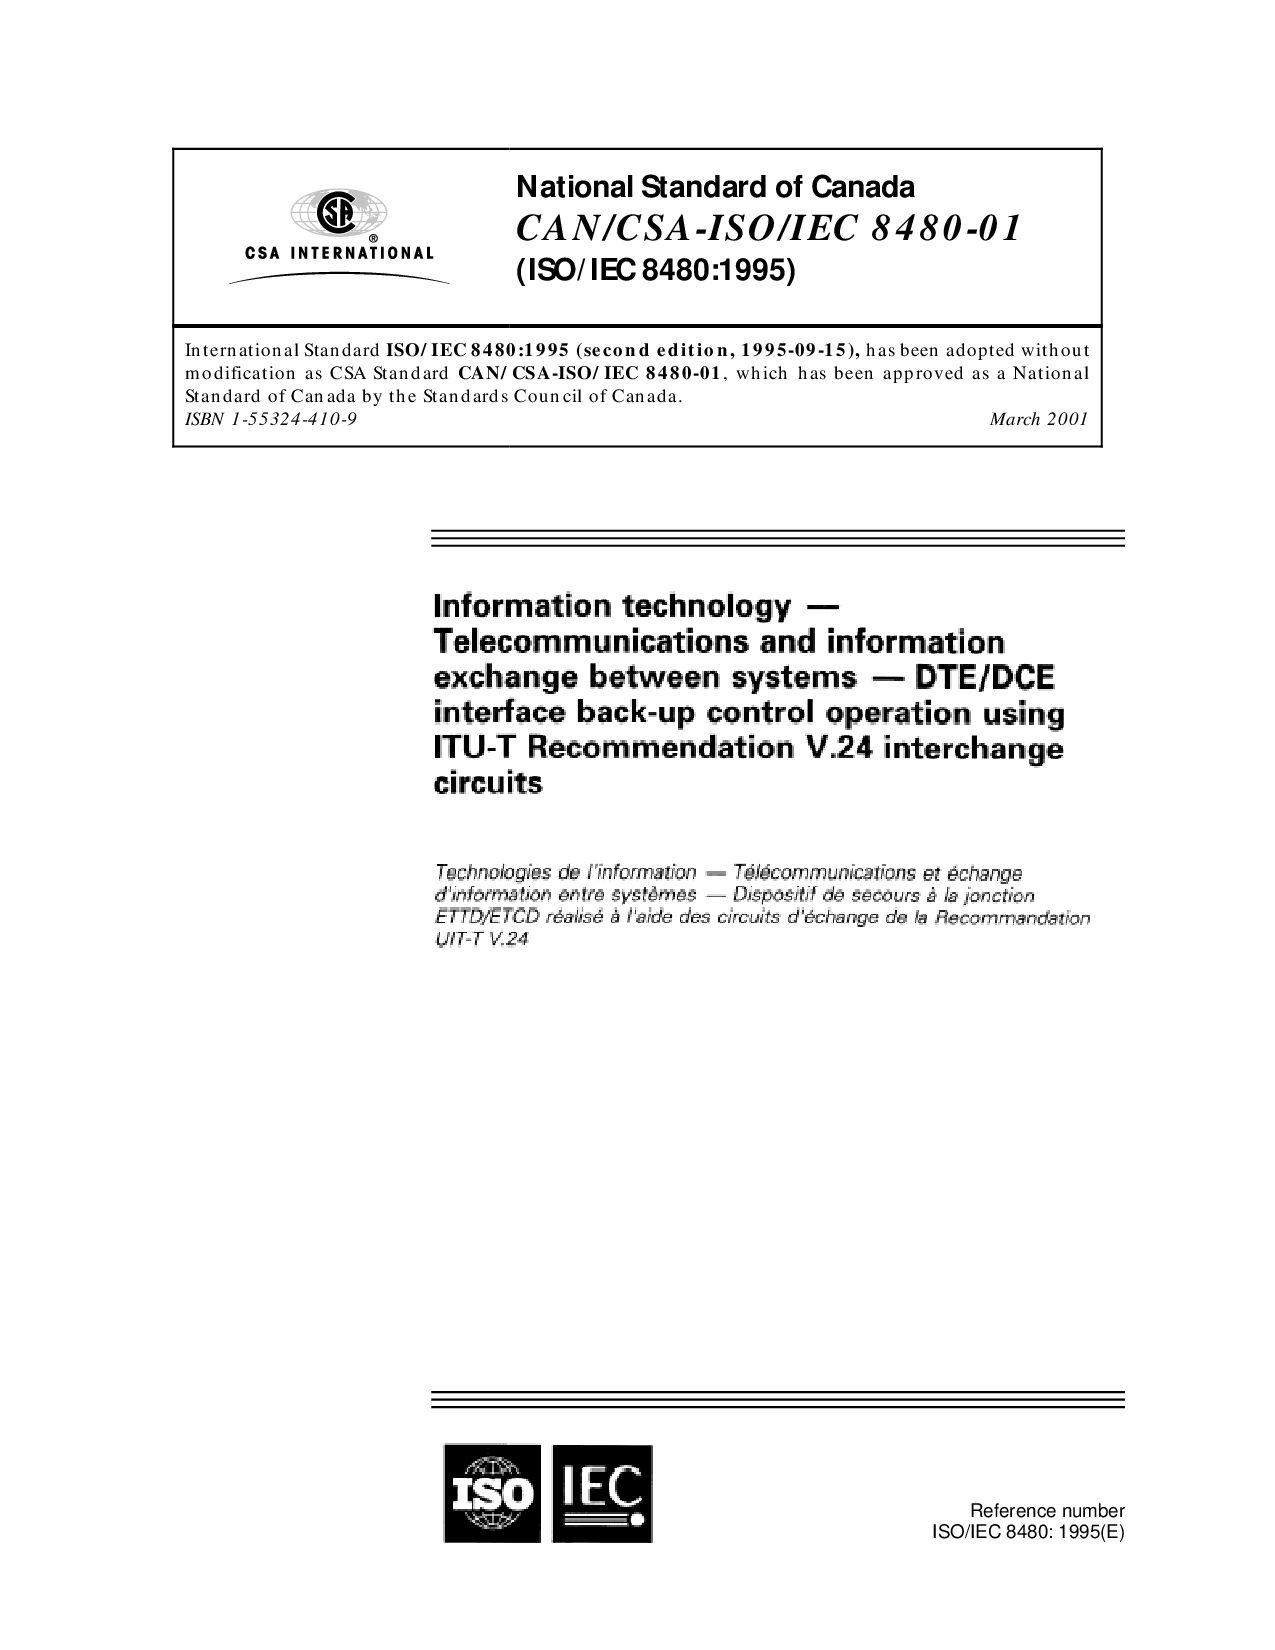 CAN/CSA-ISO/IEC 8480:2001